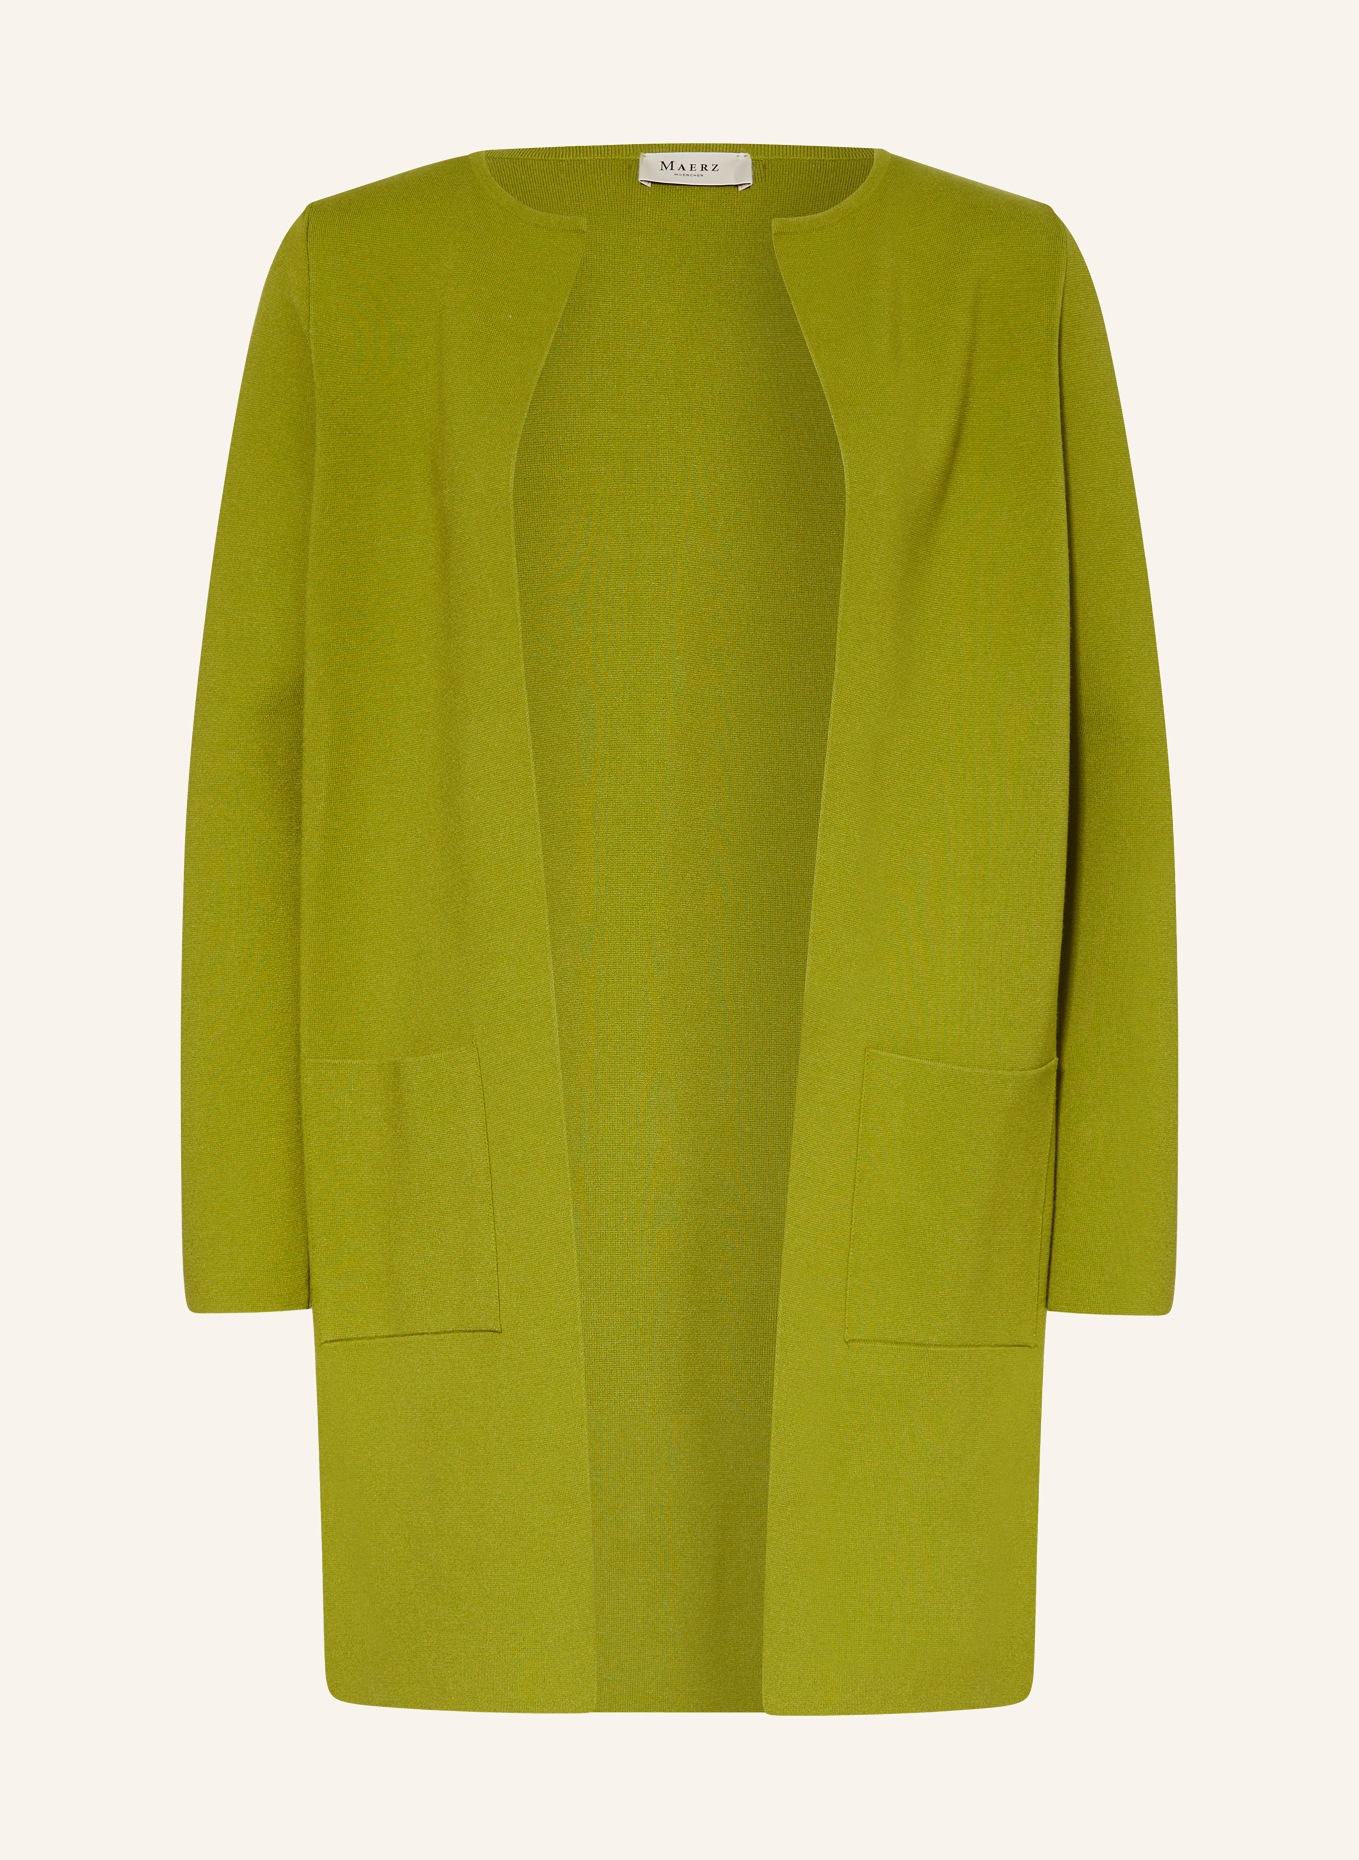 MAERZ MUENCHEN Knit cardigan, Color: GREEN (Image 1)